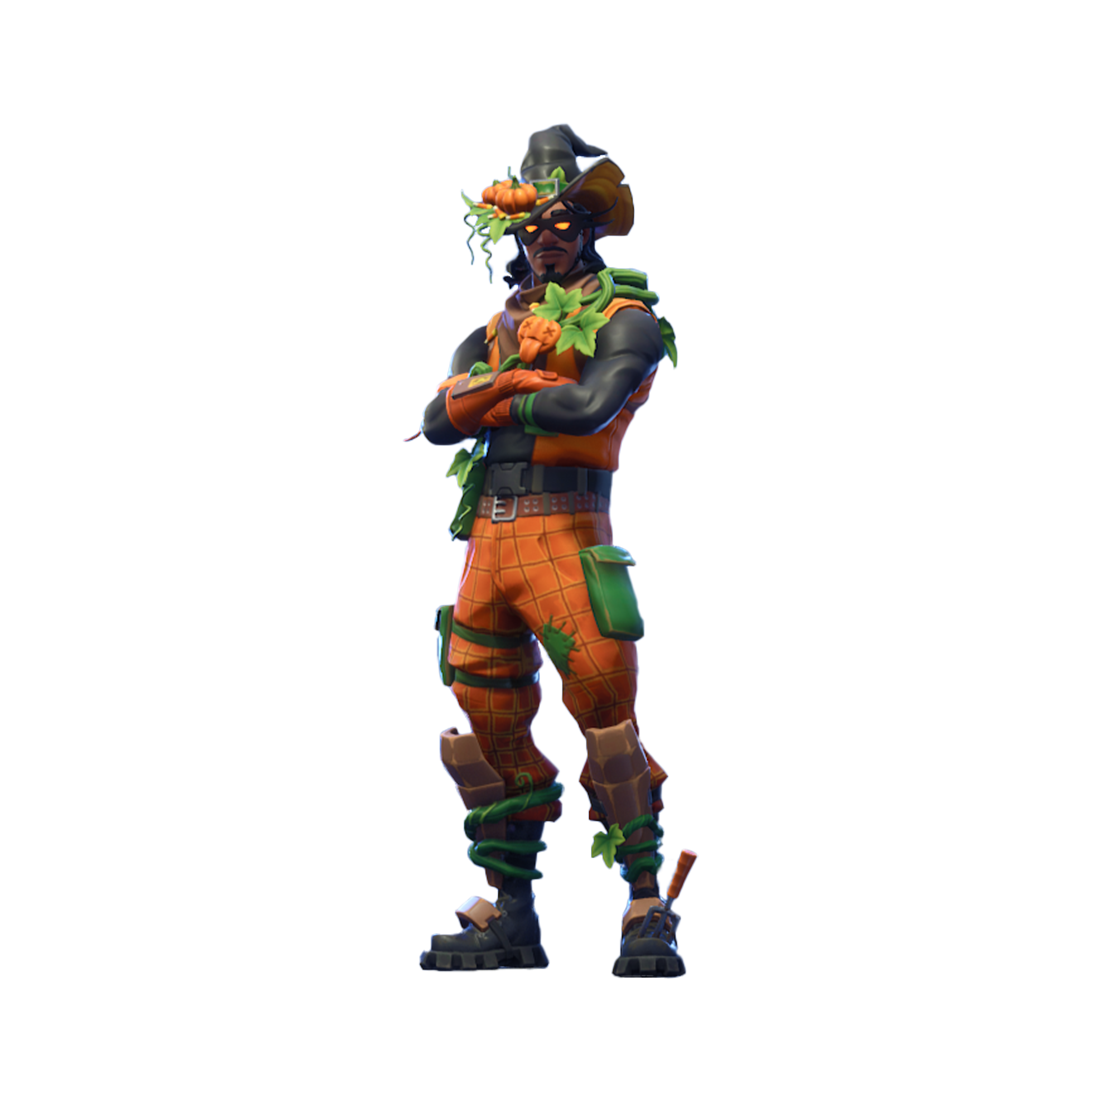 patch-patroller-png › Fortnite Tools - 1100 x 1100 png 312kB